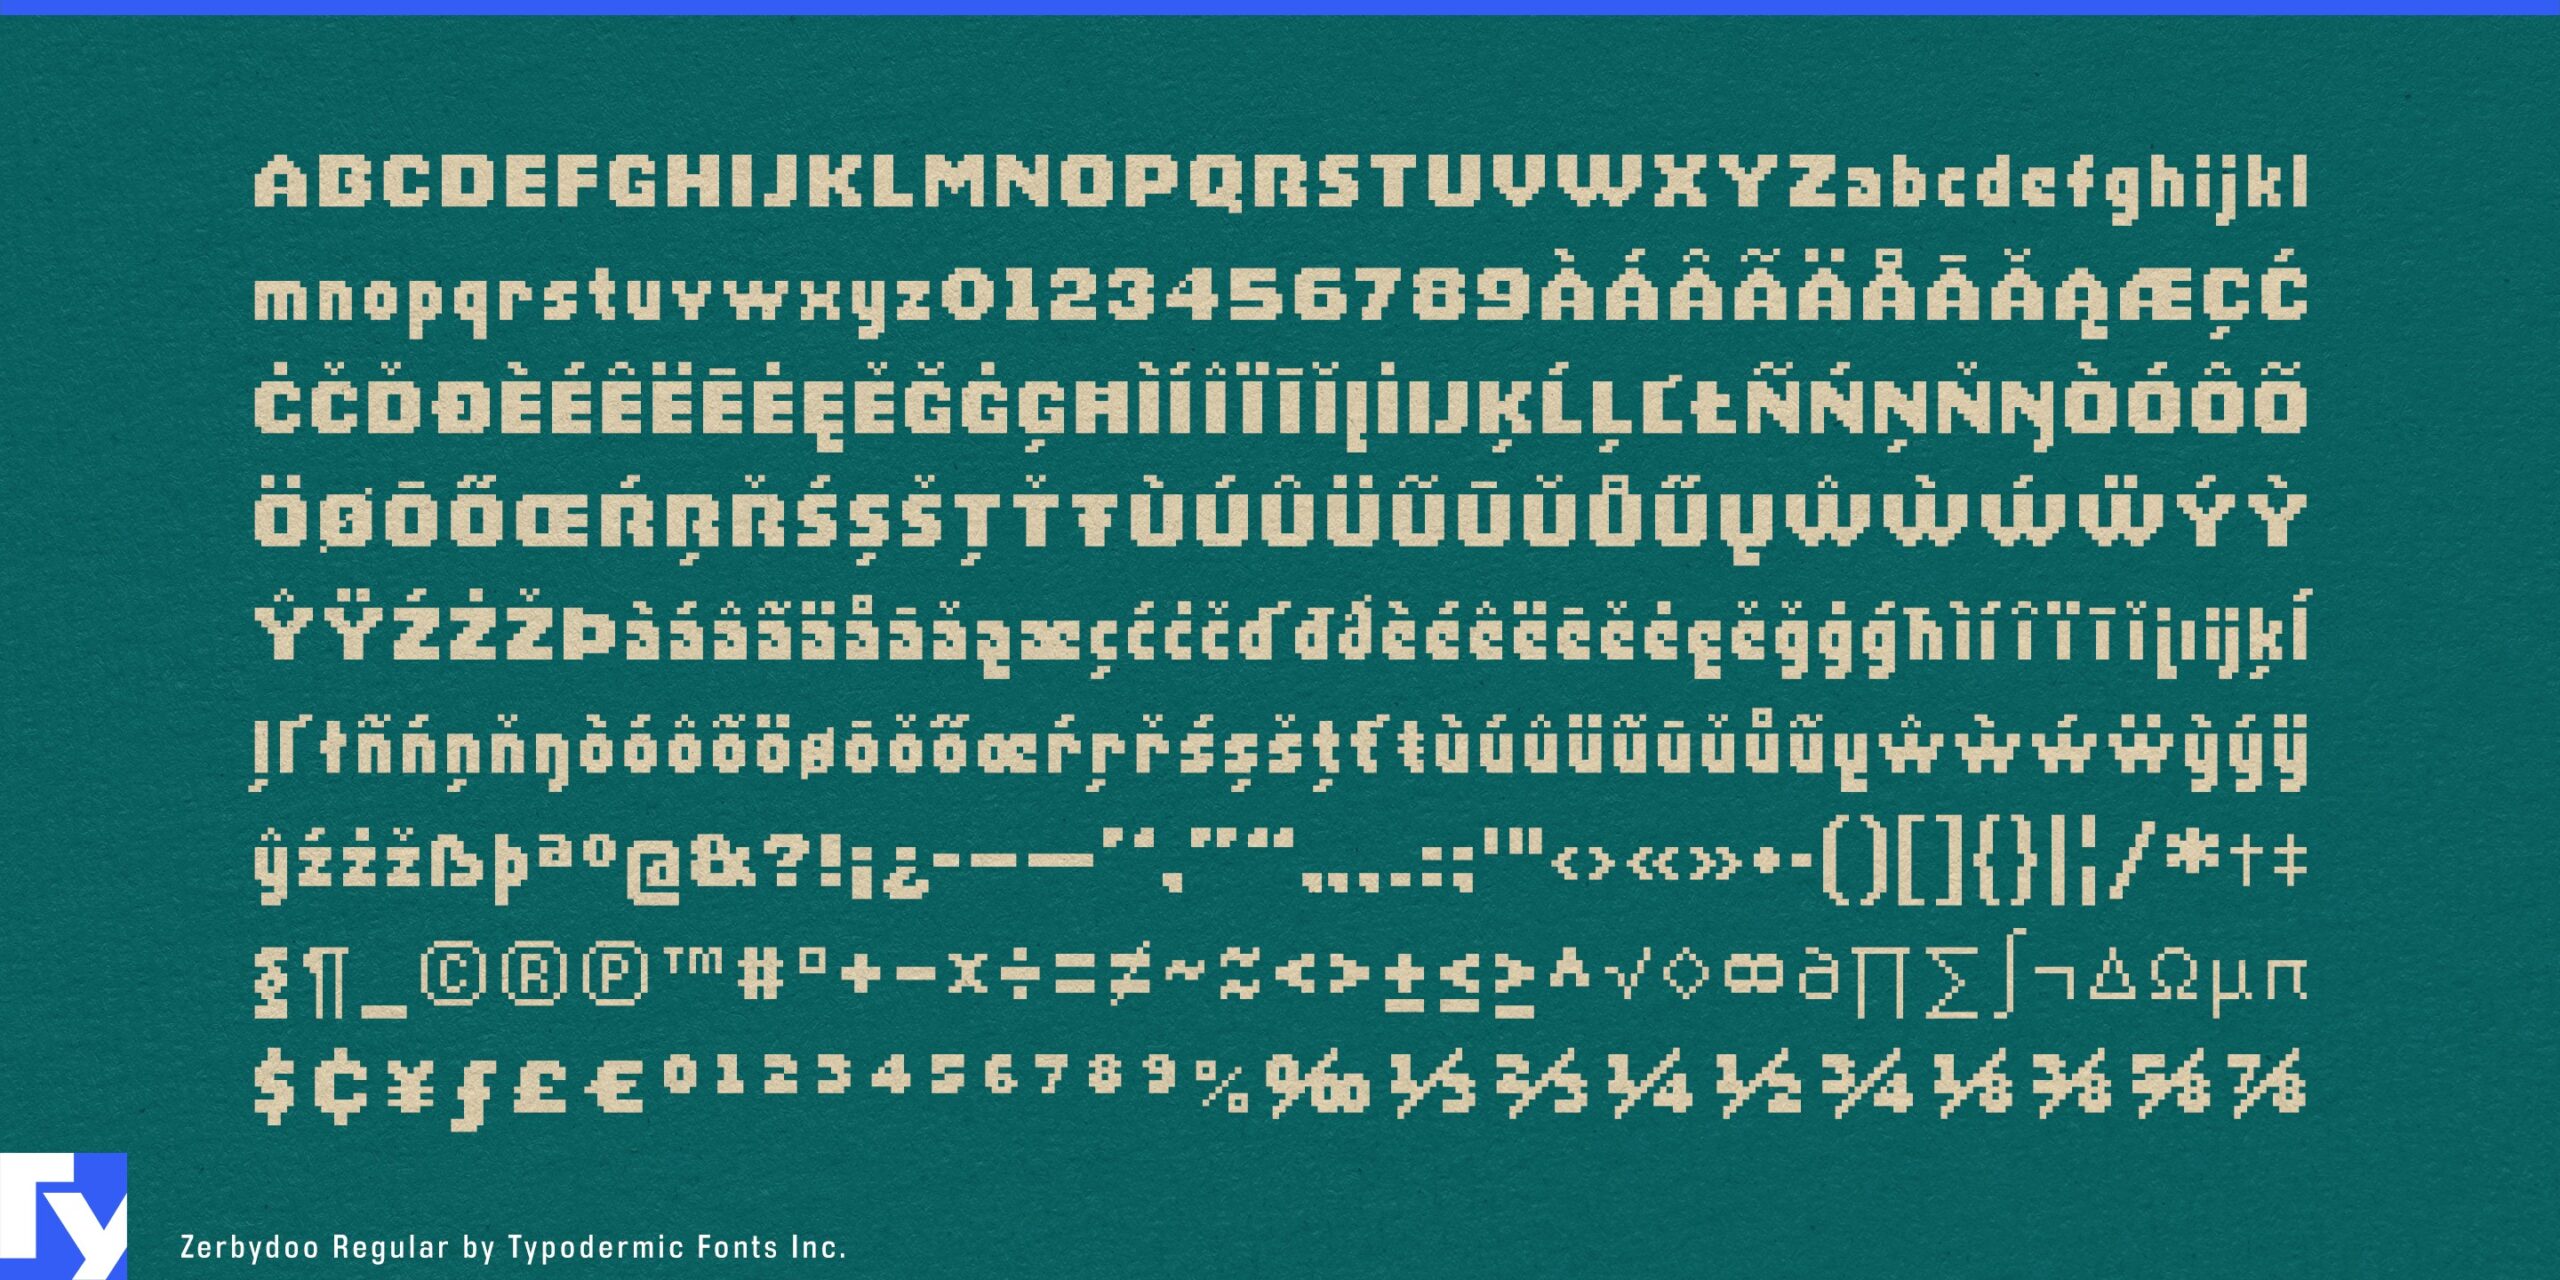 Pixel-Perfect Delight: Zerbydoo Typeface Unleashed